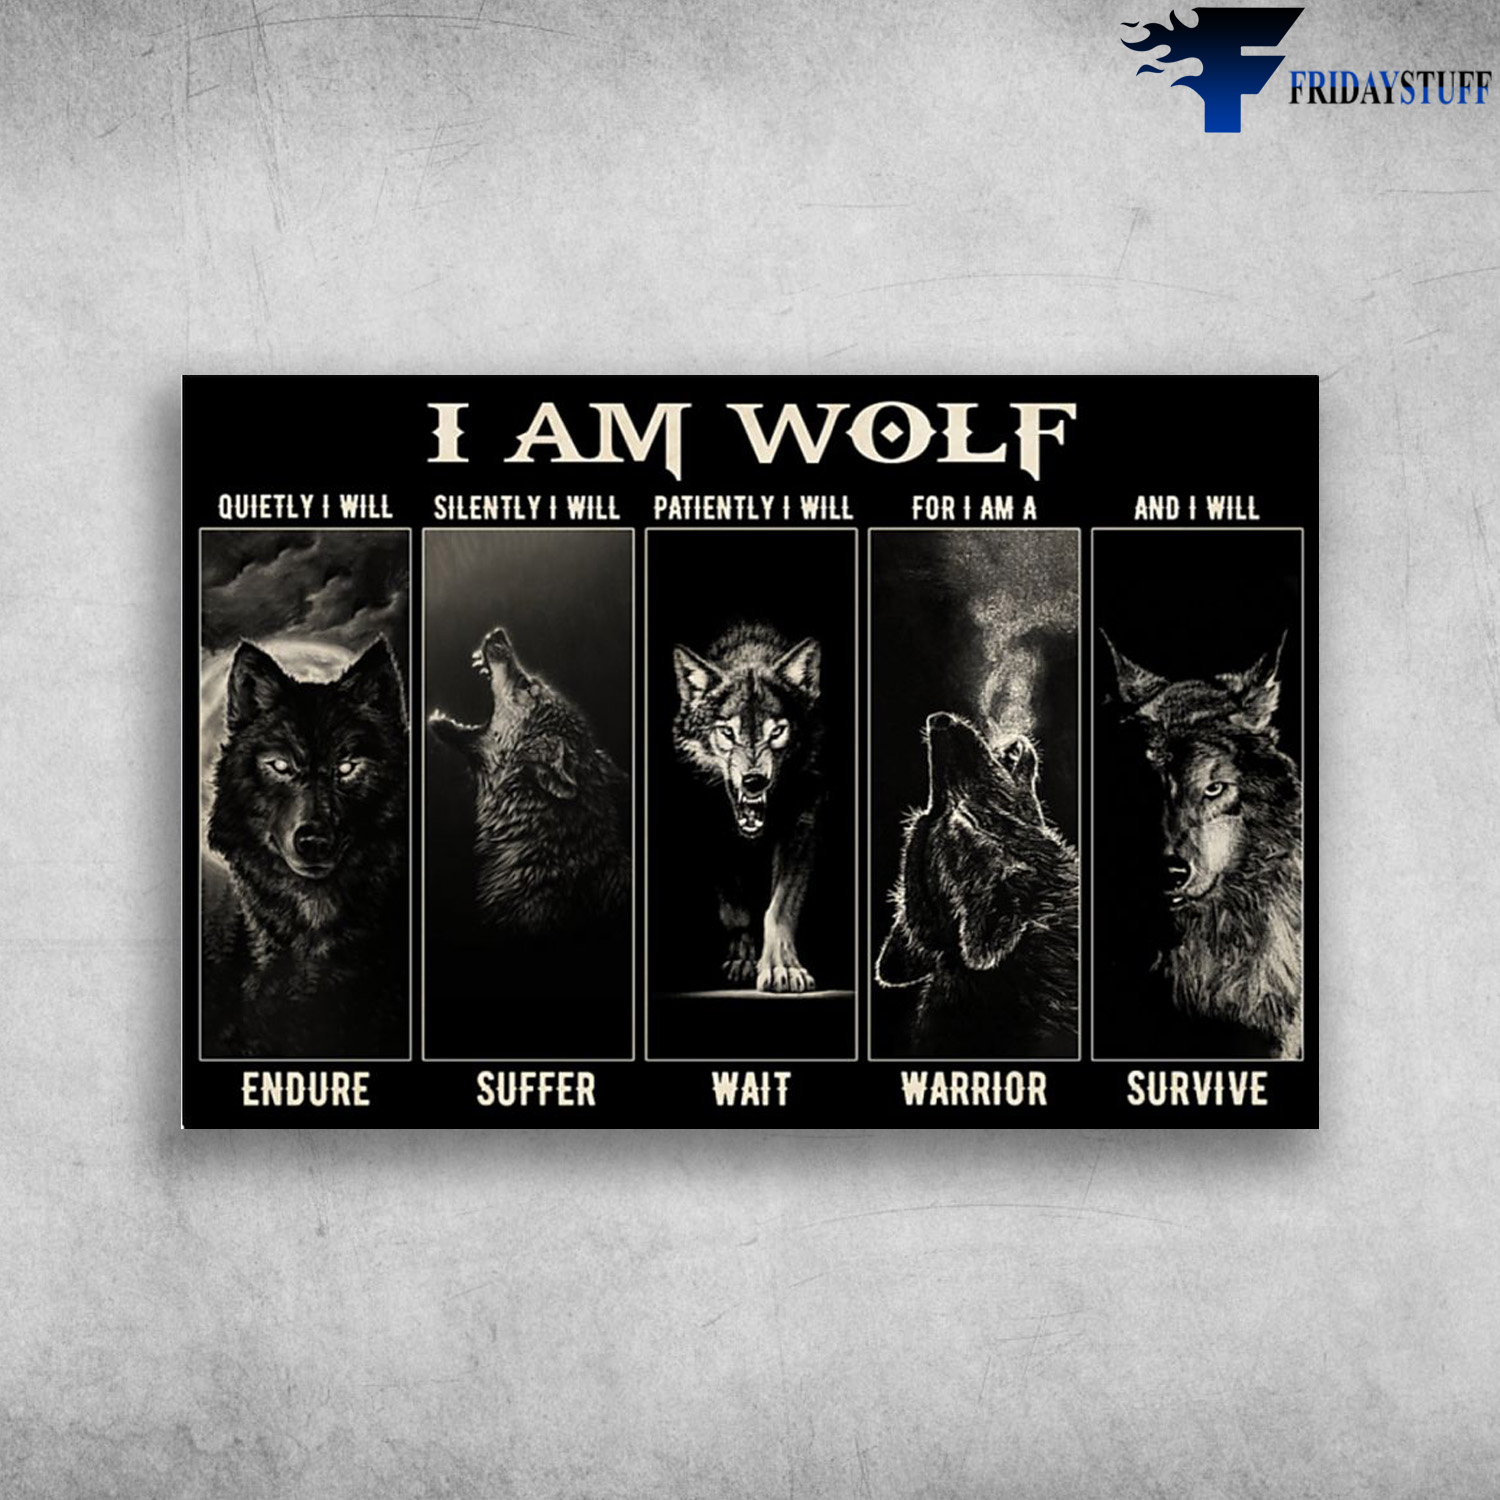 I Am Wolf - Quietly I Will Endure, Silently I Will Suffer, Patiently I Will Wait, For I Am A Warrior, And I Will Survive